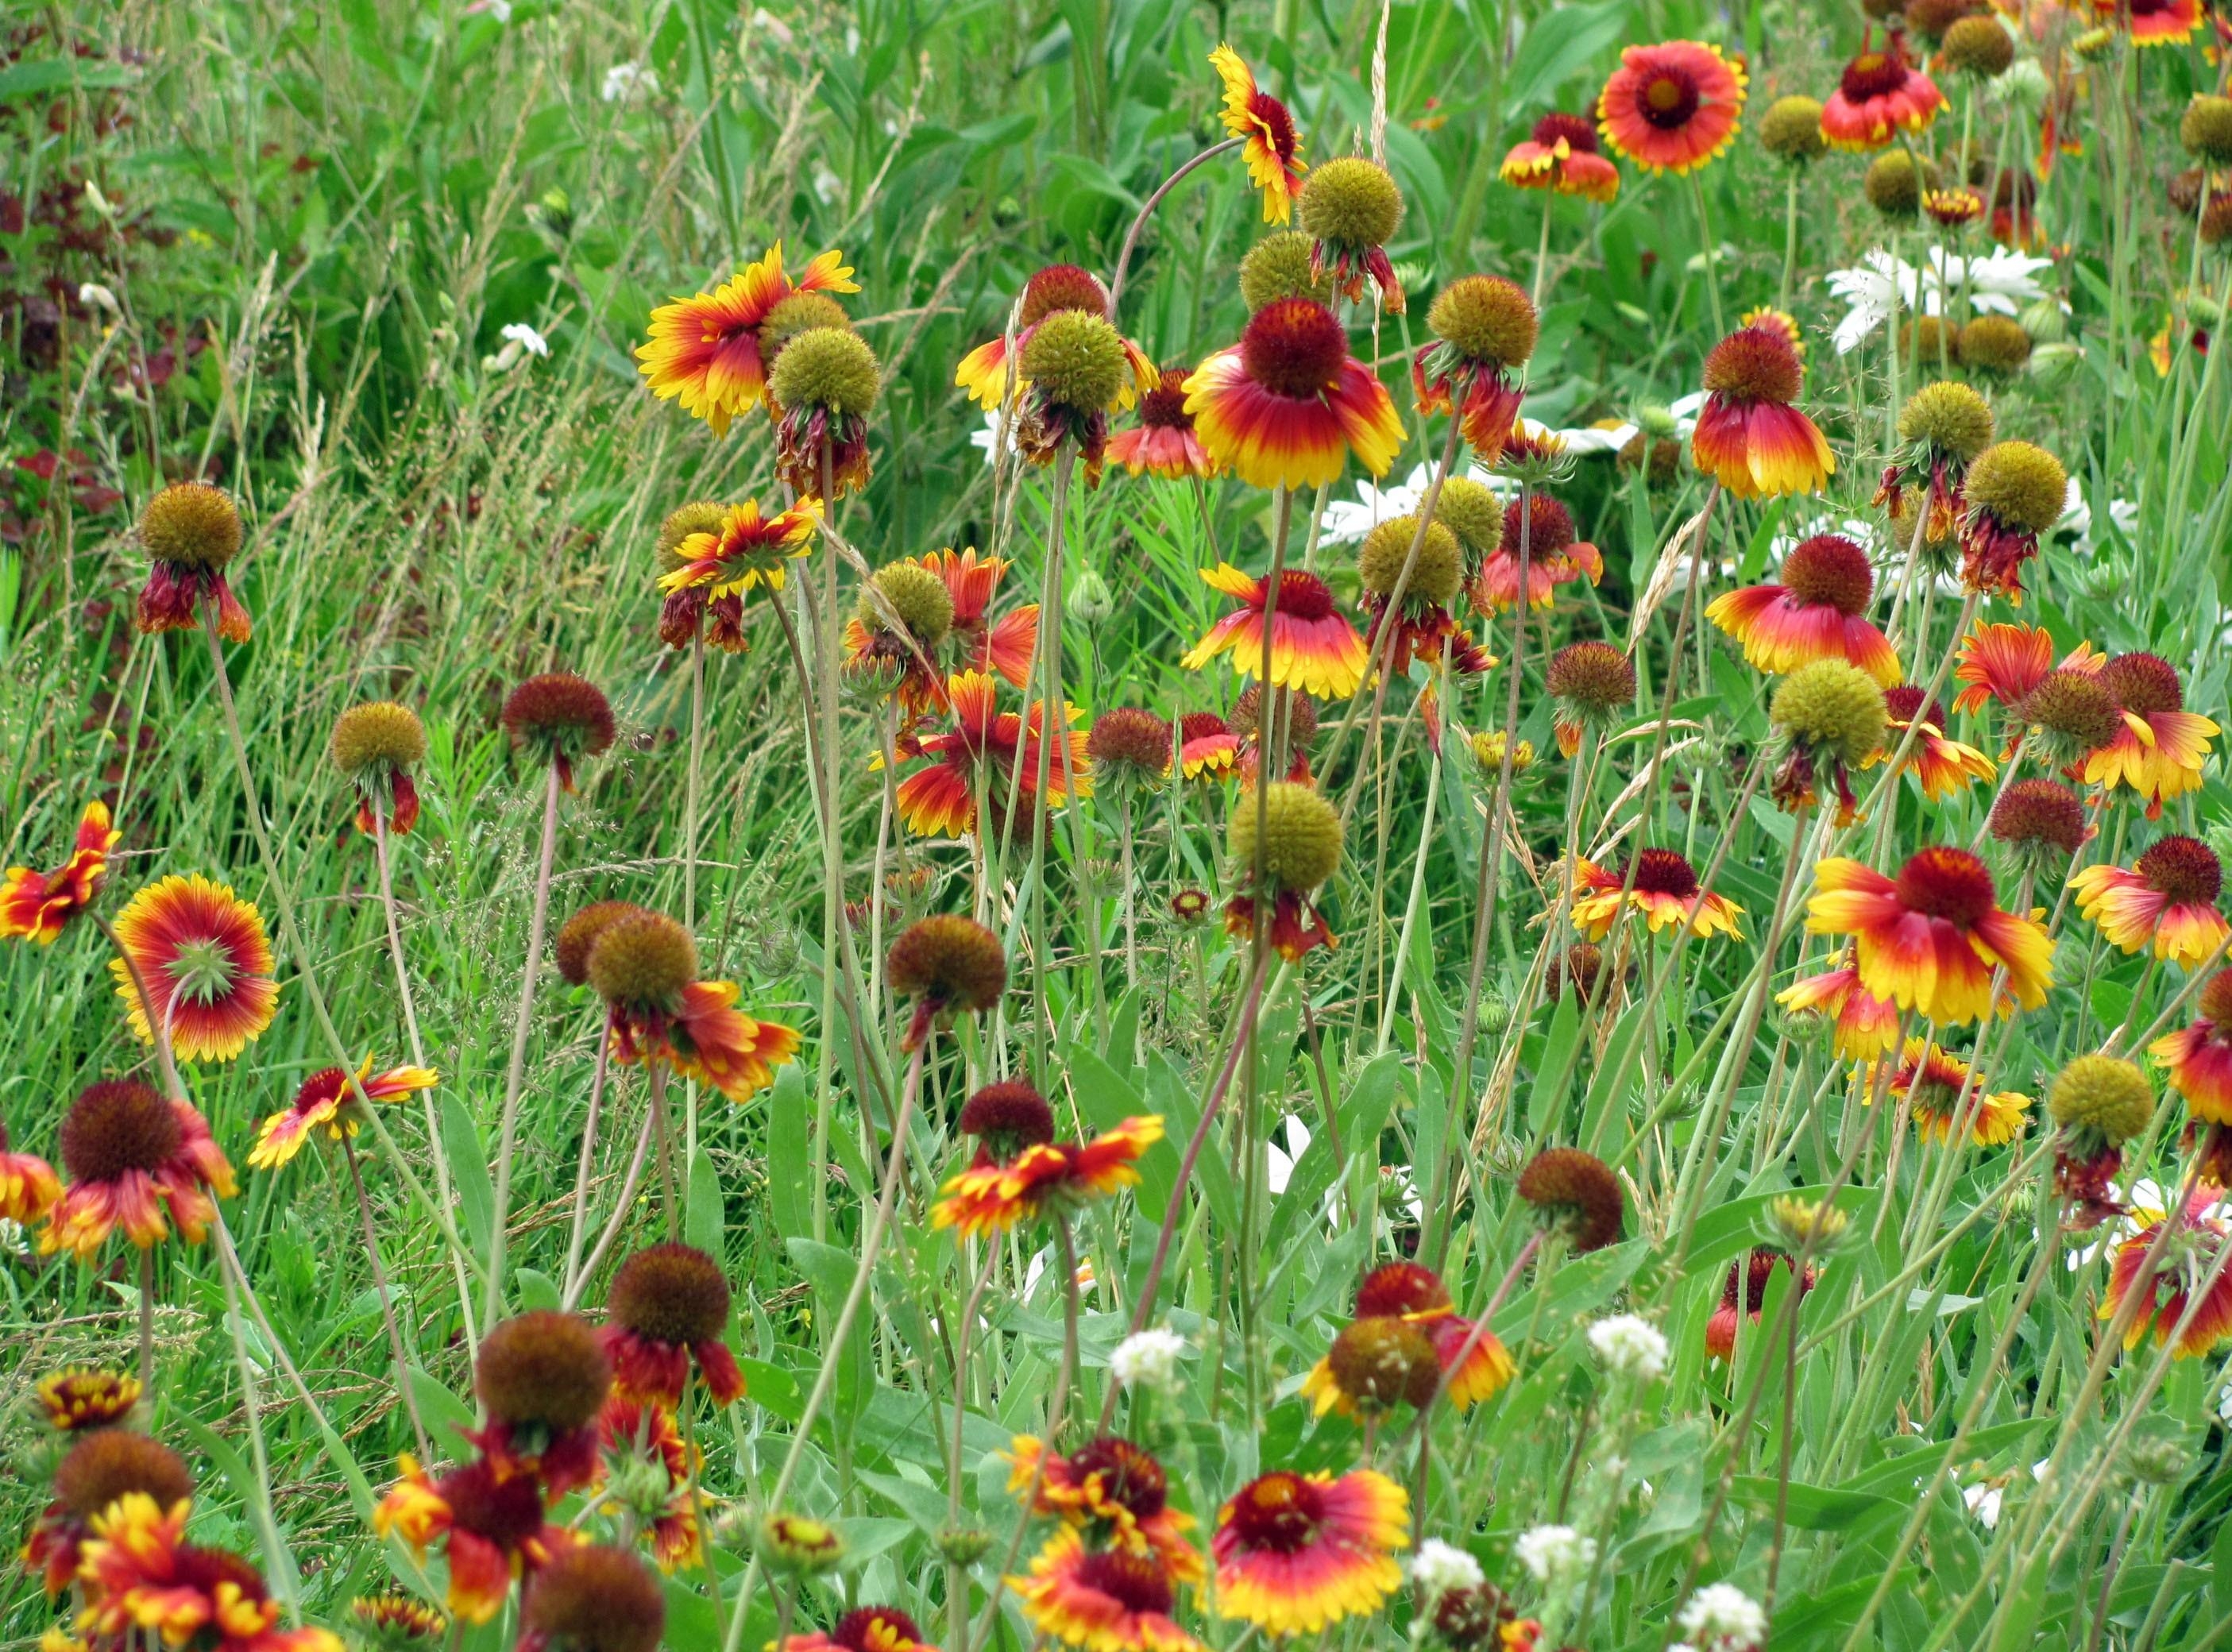 greens, flowers, grass, camomile, polyana, glade, gaillardia wallpapers for tablet